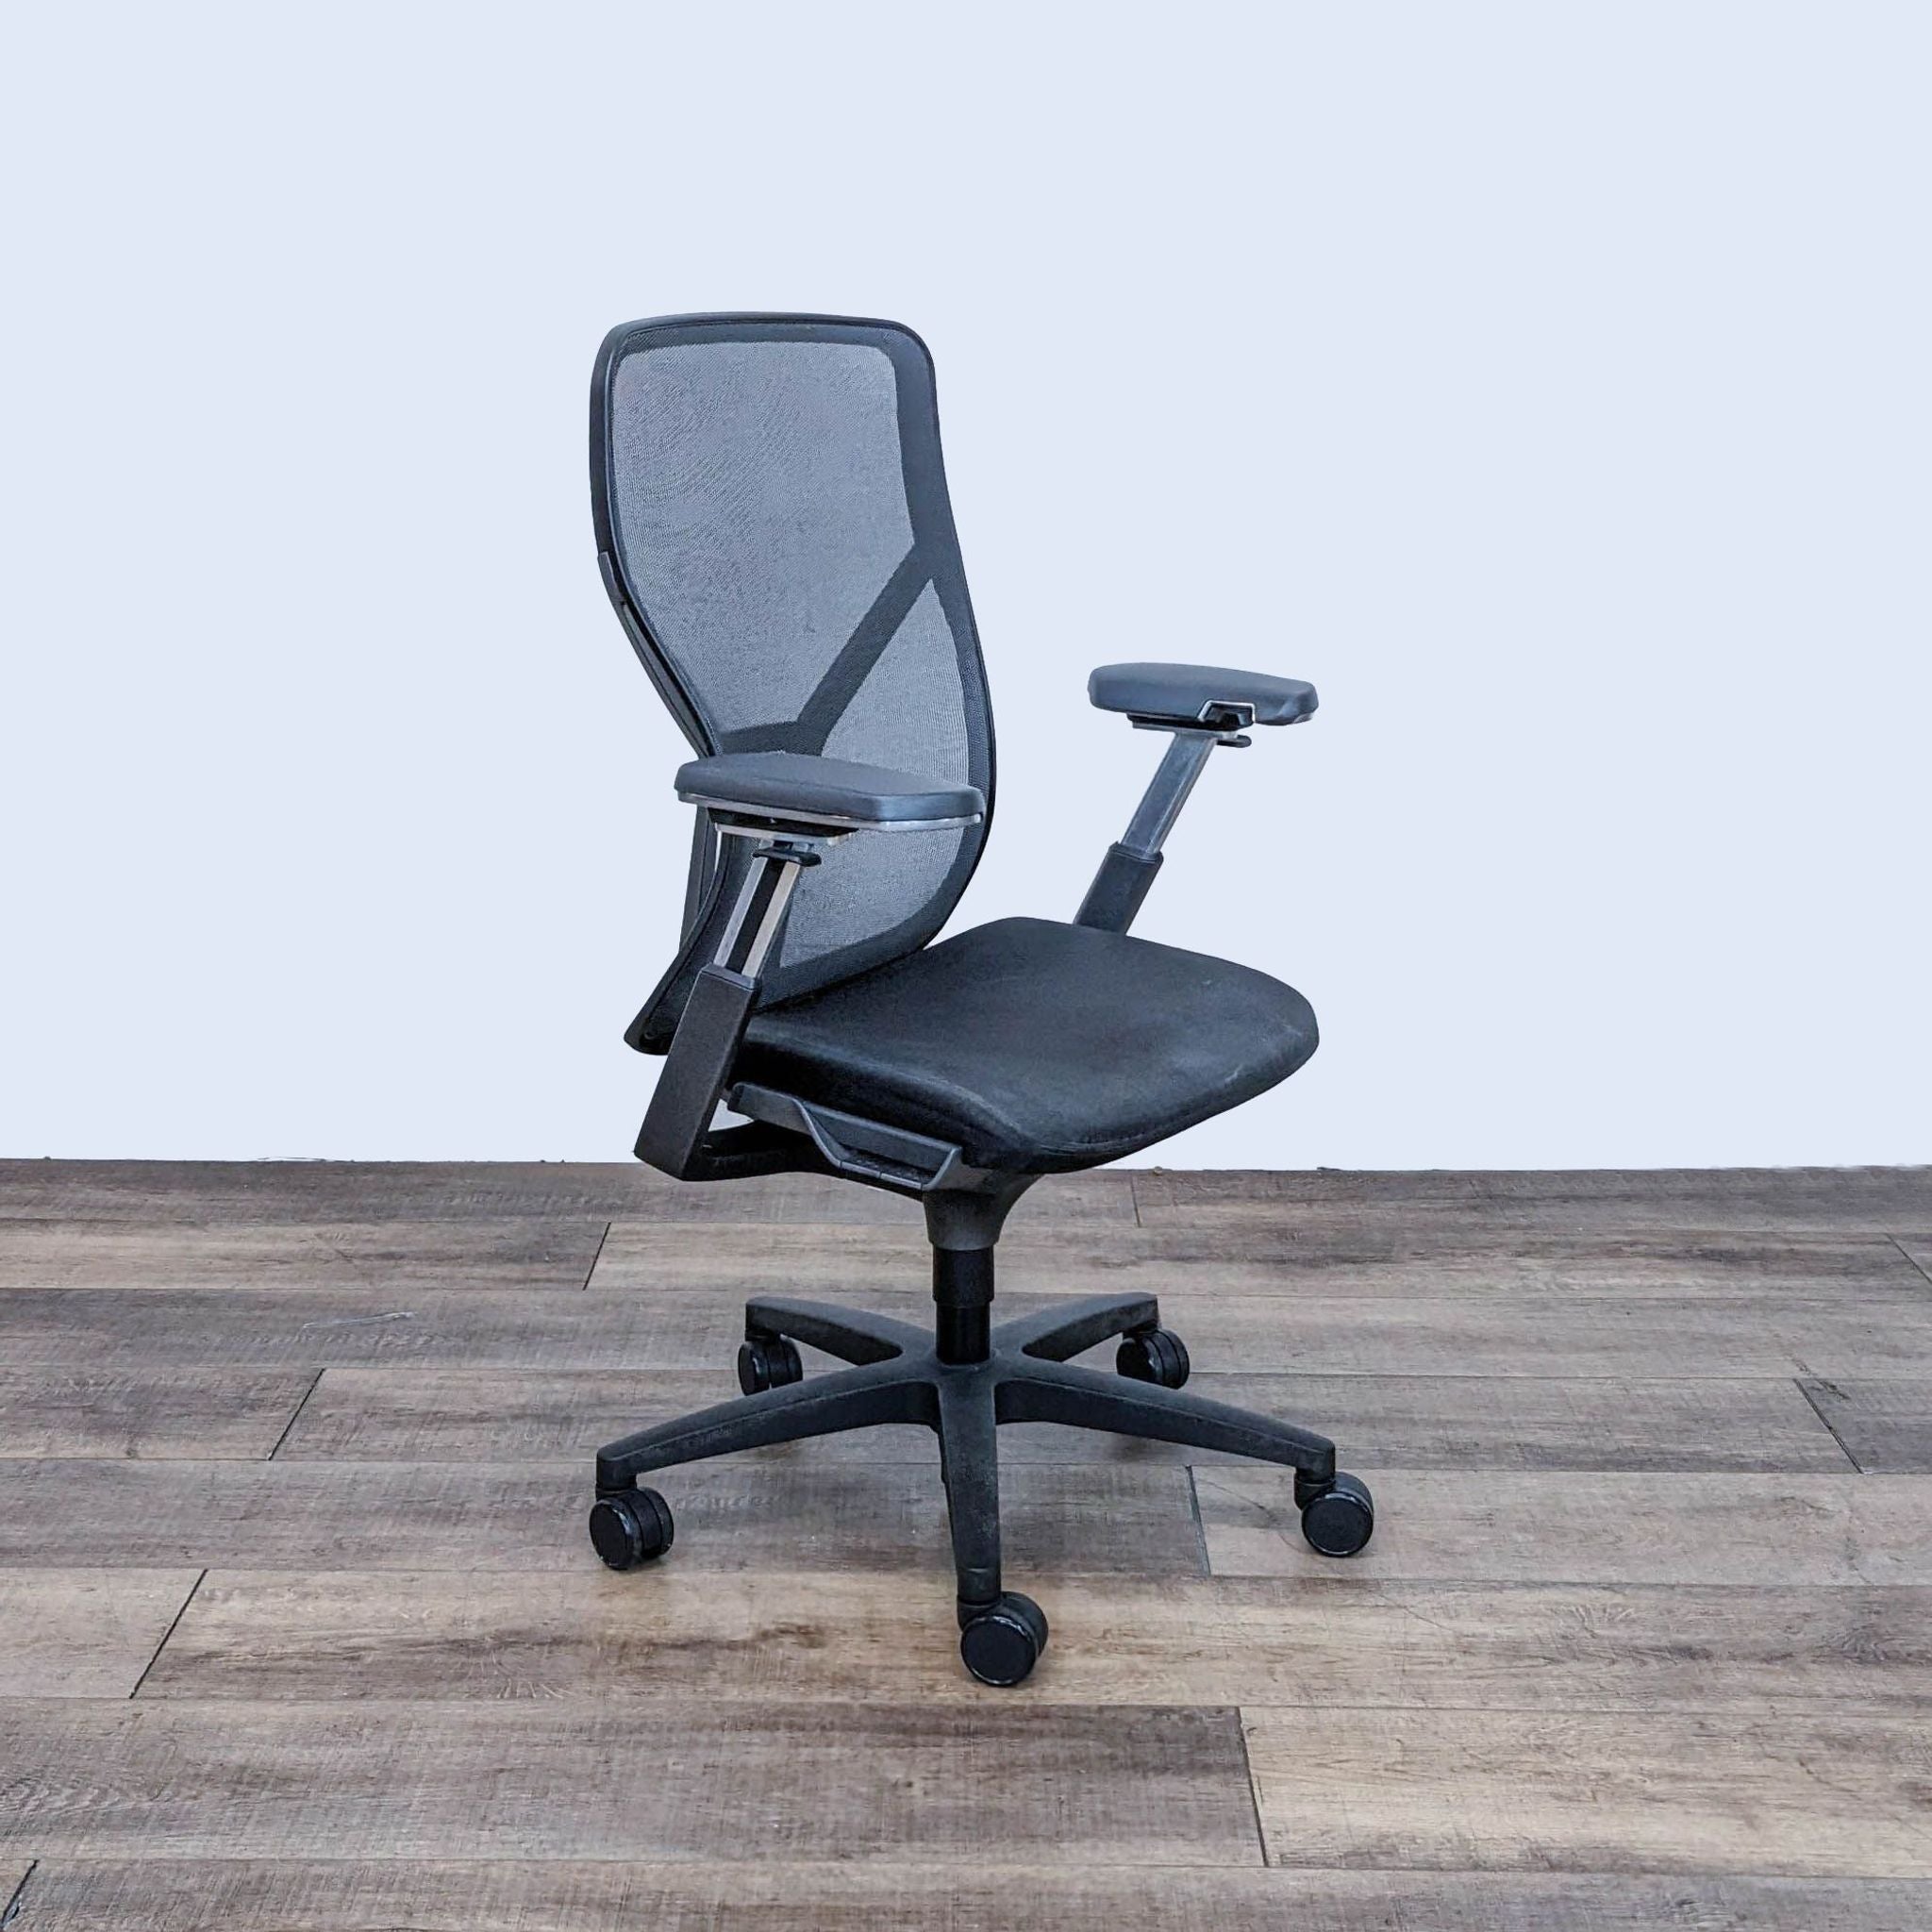 AllSteel Acuity ergonomic office chair with mesh backrest and adjustable armrests on caster wheels.